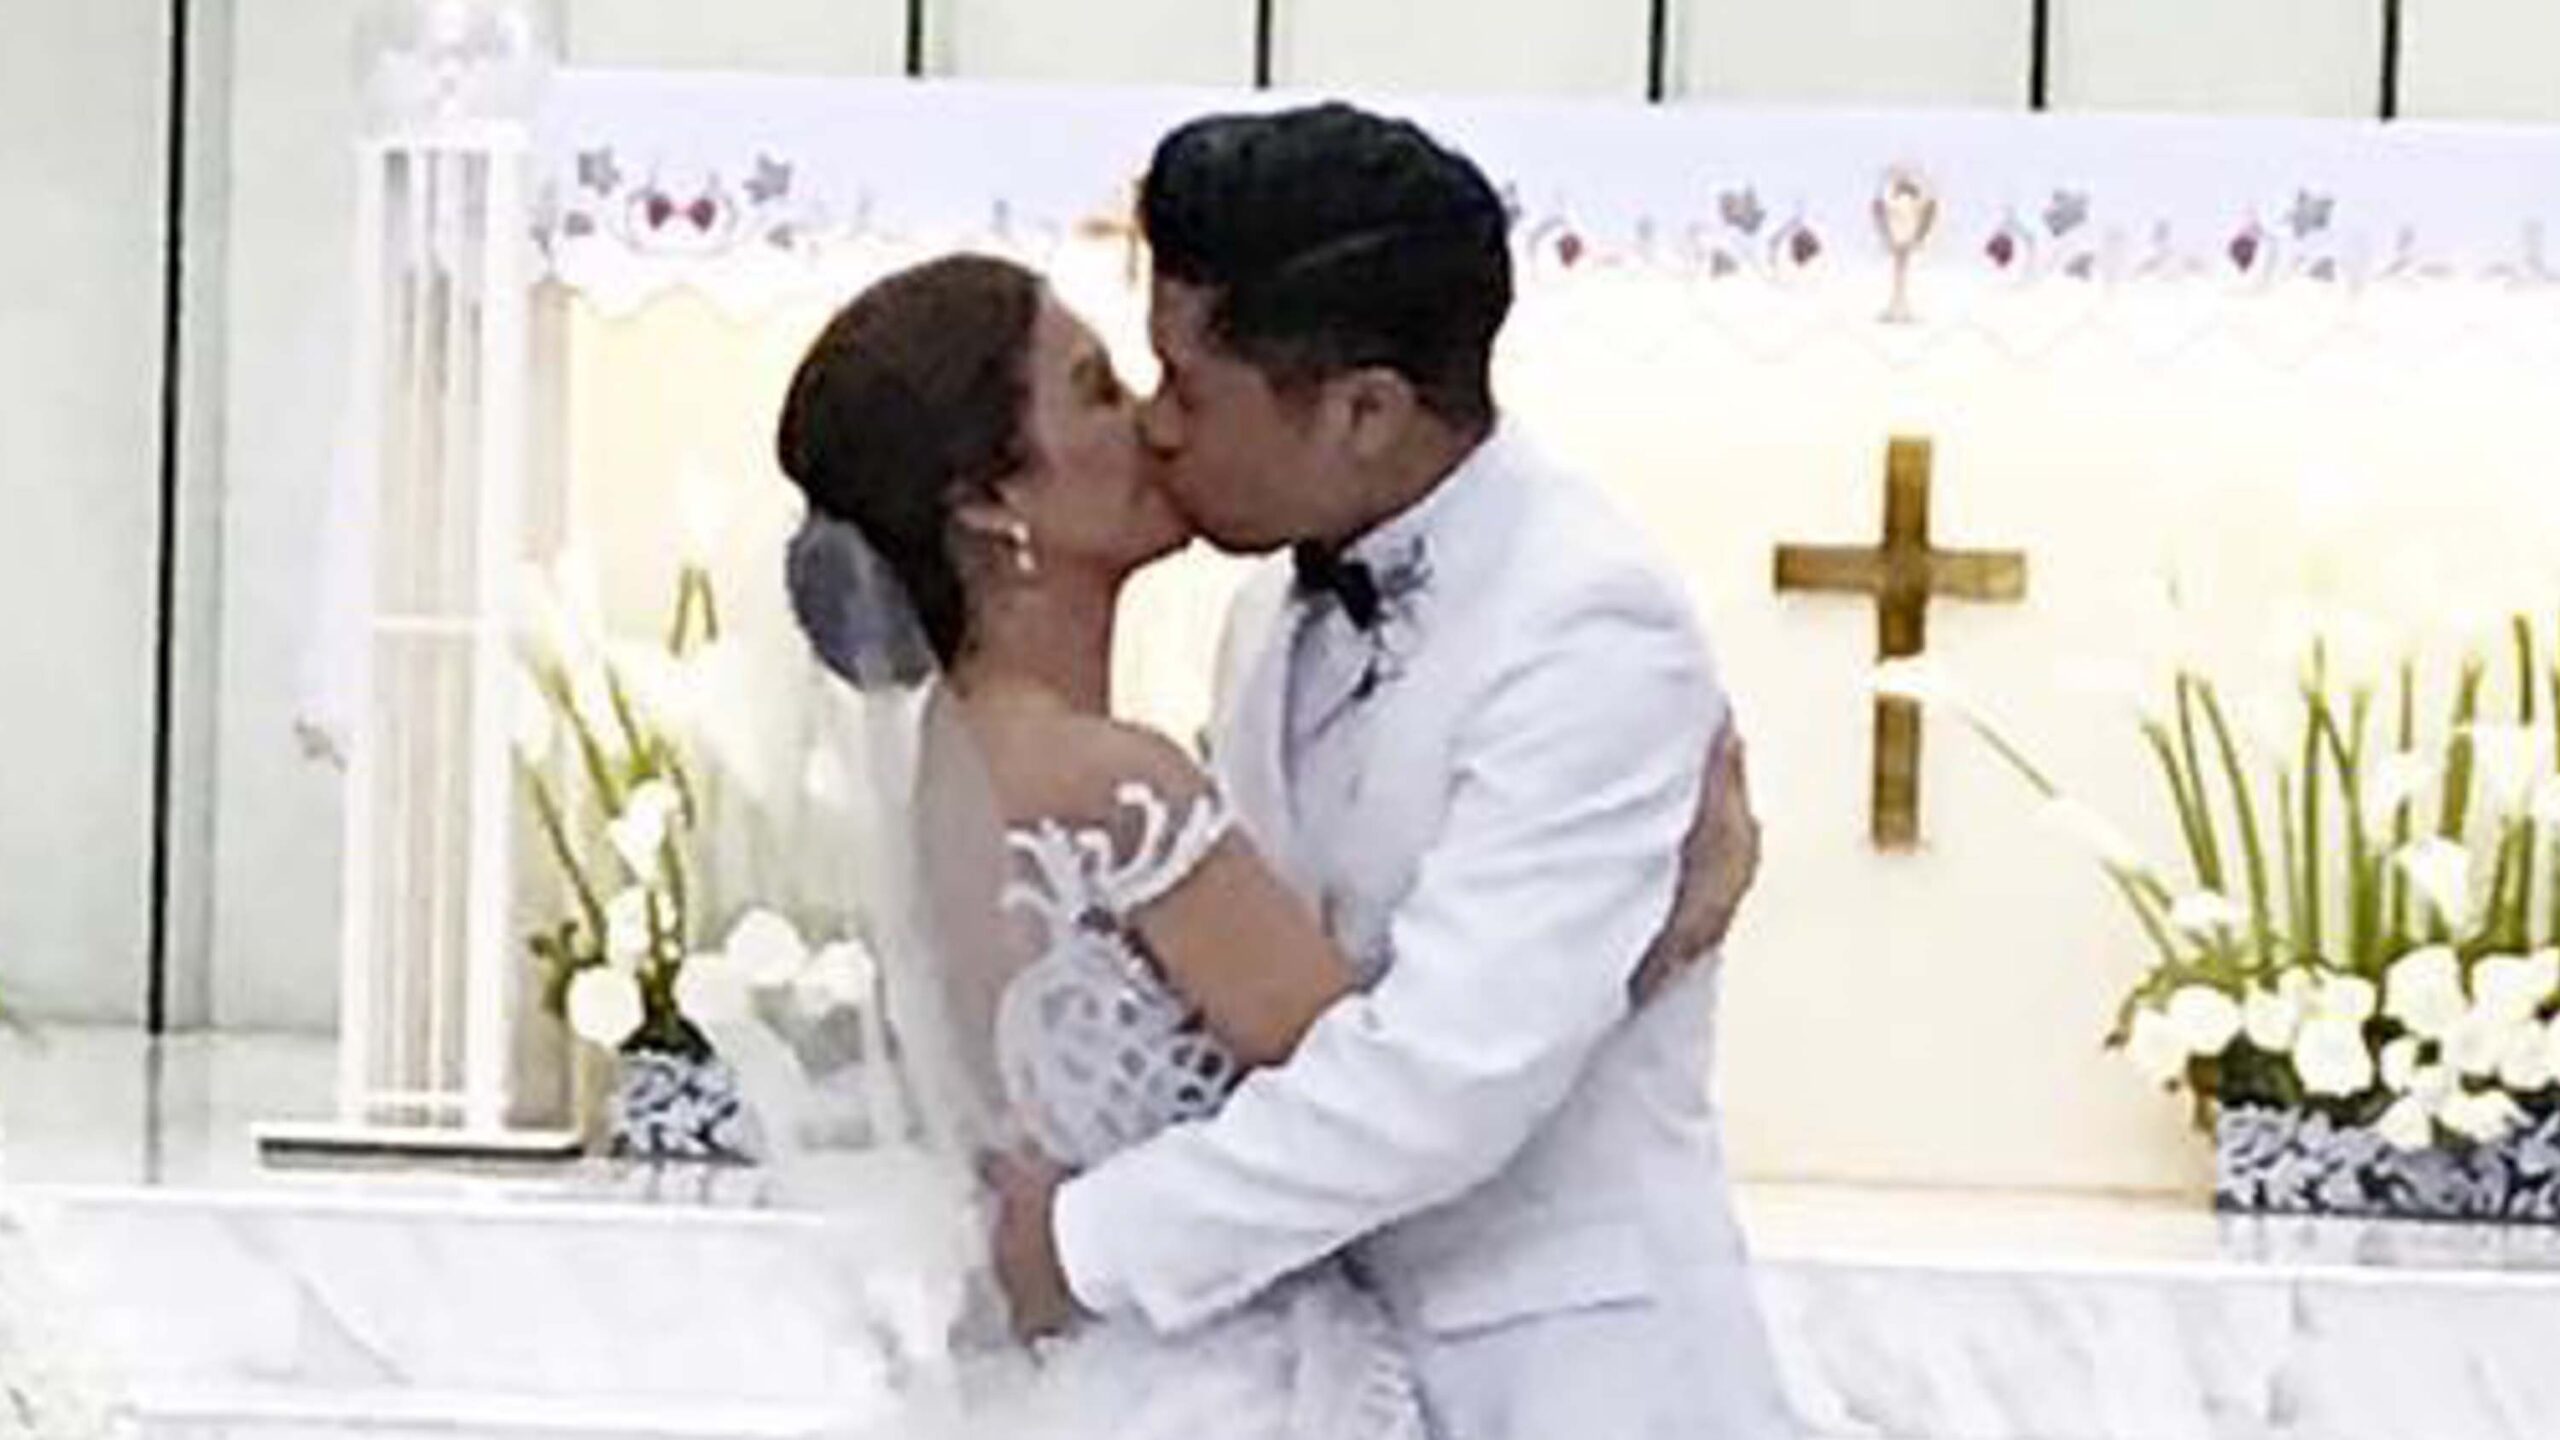 WATCH: Paul Jake Castillo, Kaye Abad’s first kiss as husband and wife